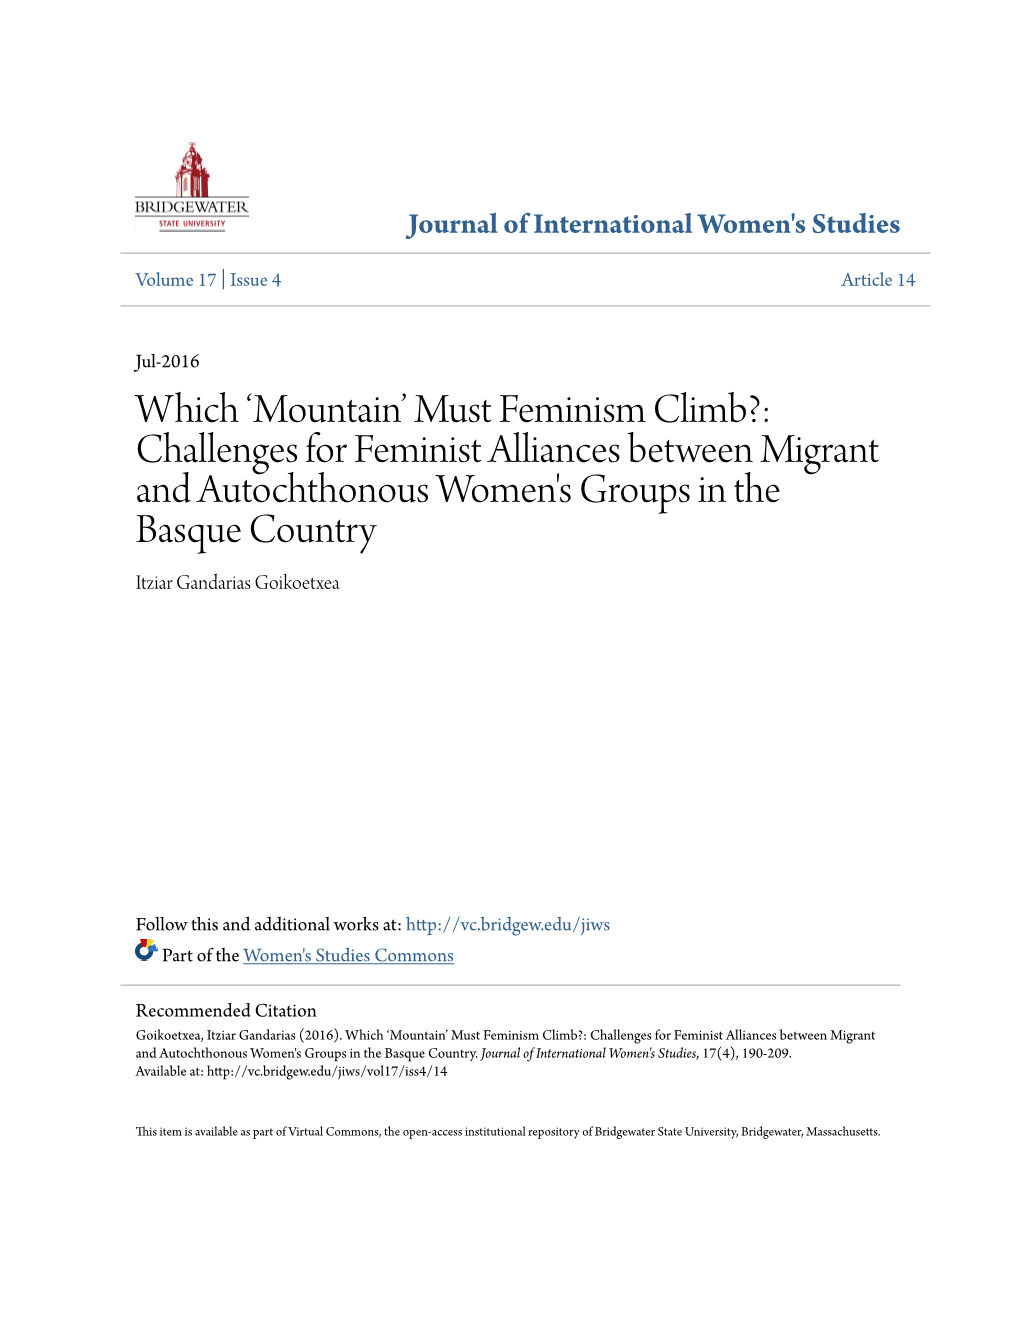 Mountain’ Must Feminism Climb?: Challenges for Feminist Alliances Between Migrant and Autochthonous Women's Groups in the Basque Country Itziar Gandarias Goikoetxea